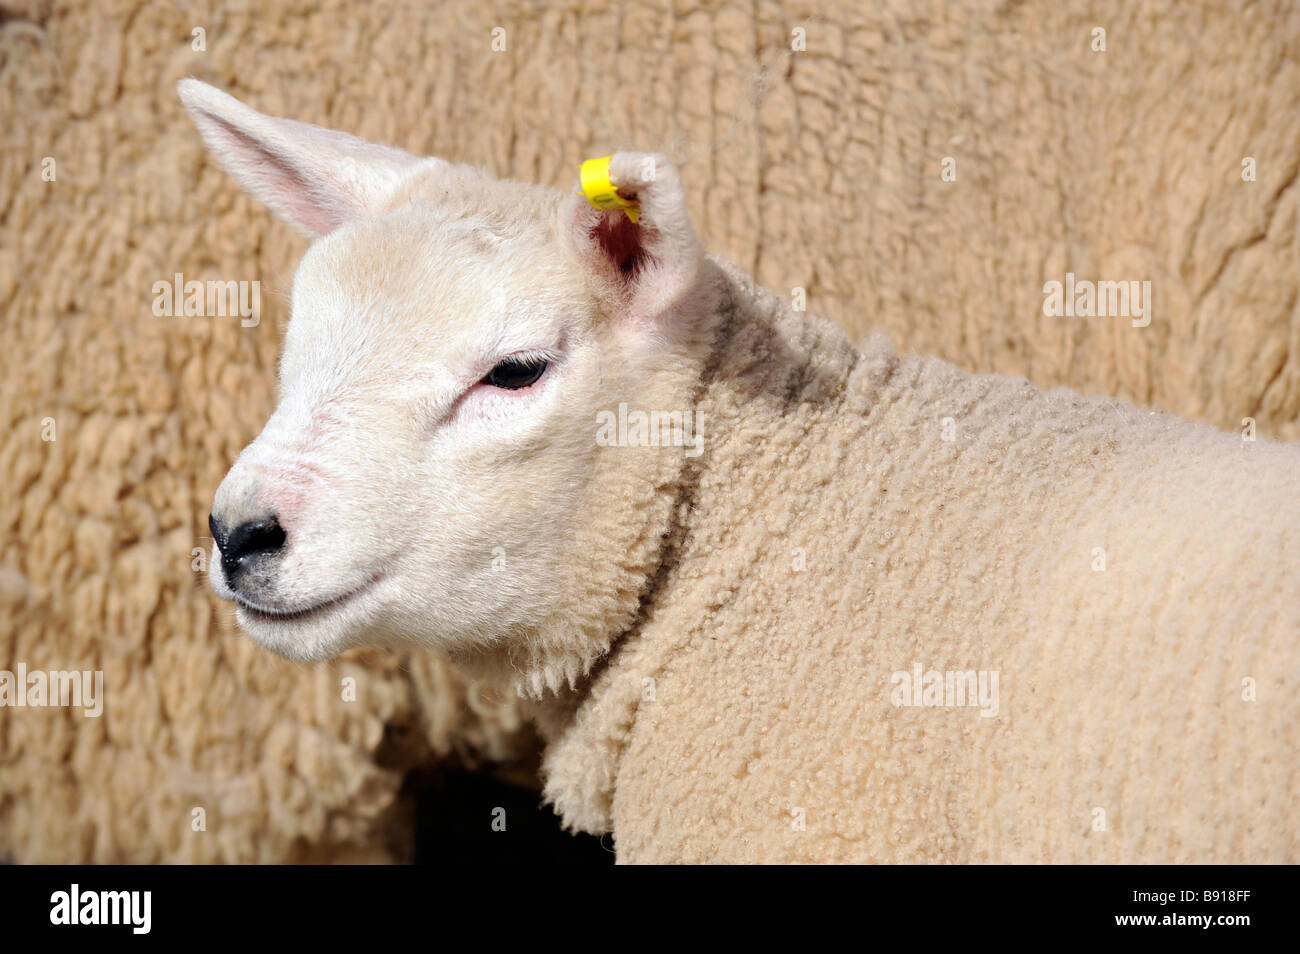 Close up of a Texel lambs head  Stock Photo